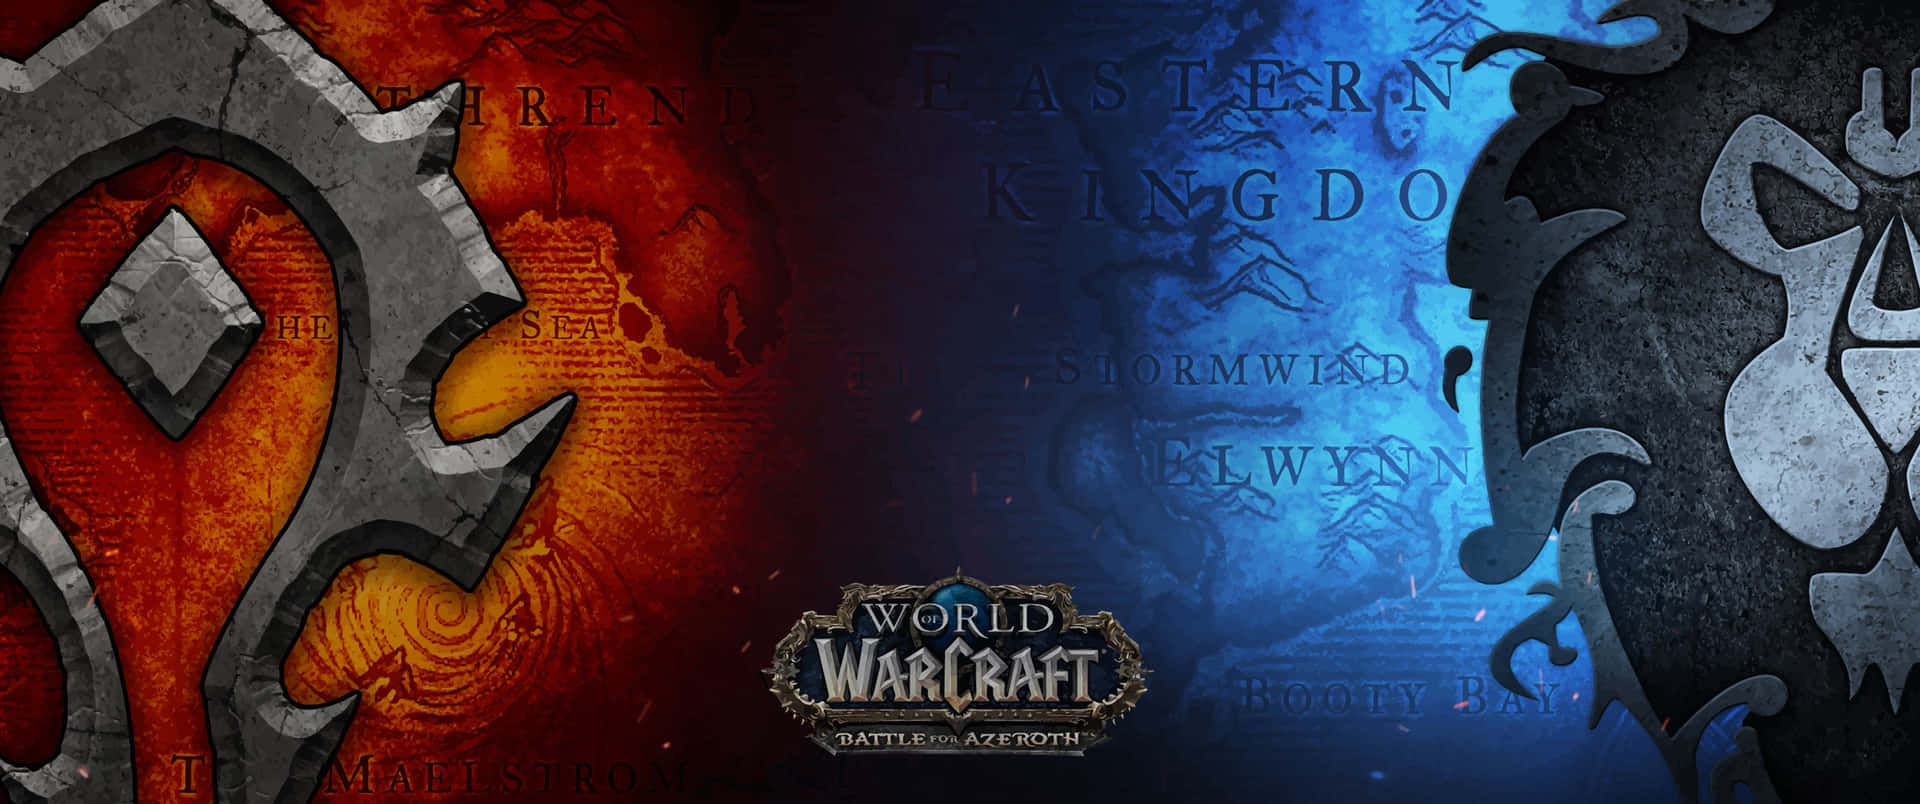 Epic Battle For Azeroth: World Of Warcraft Power Struggles Wallpaper